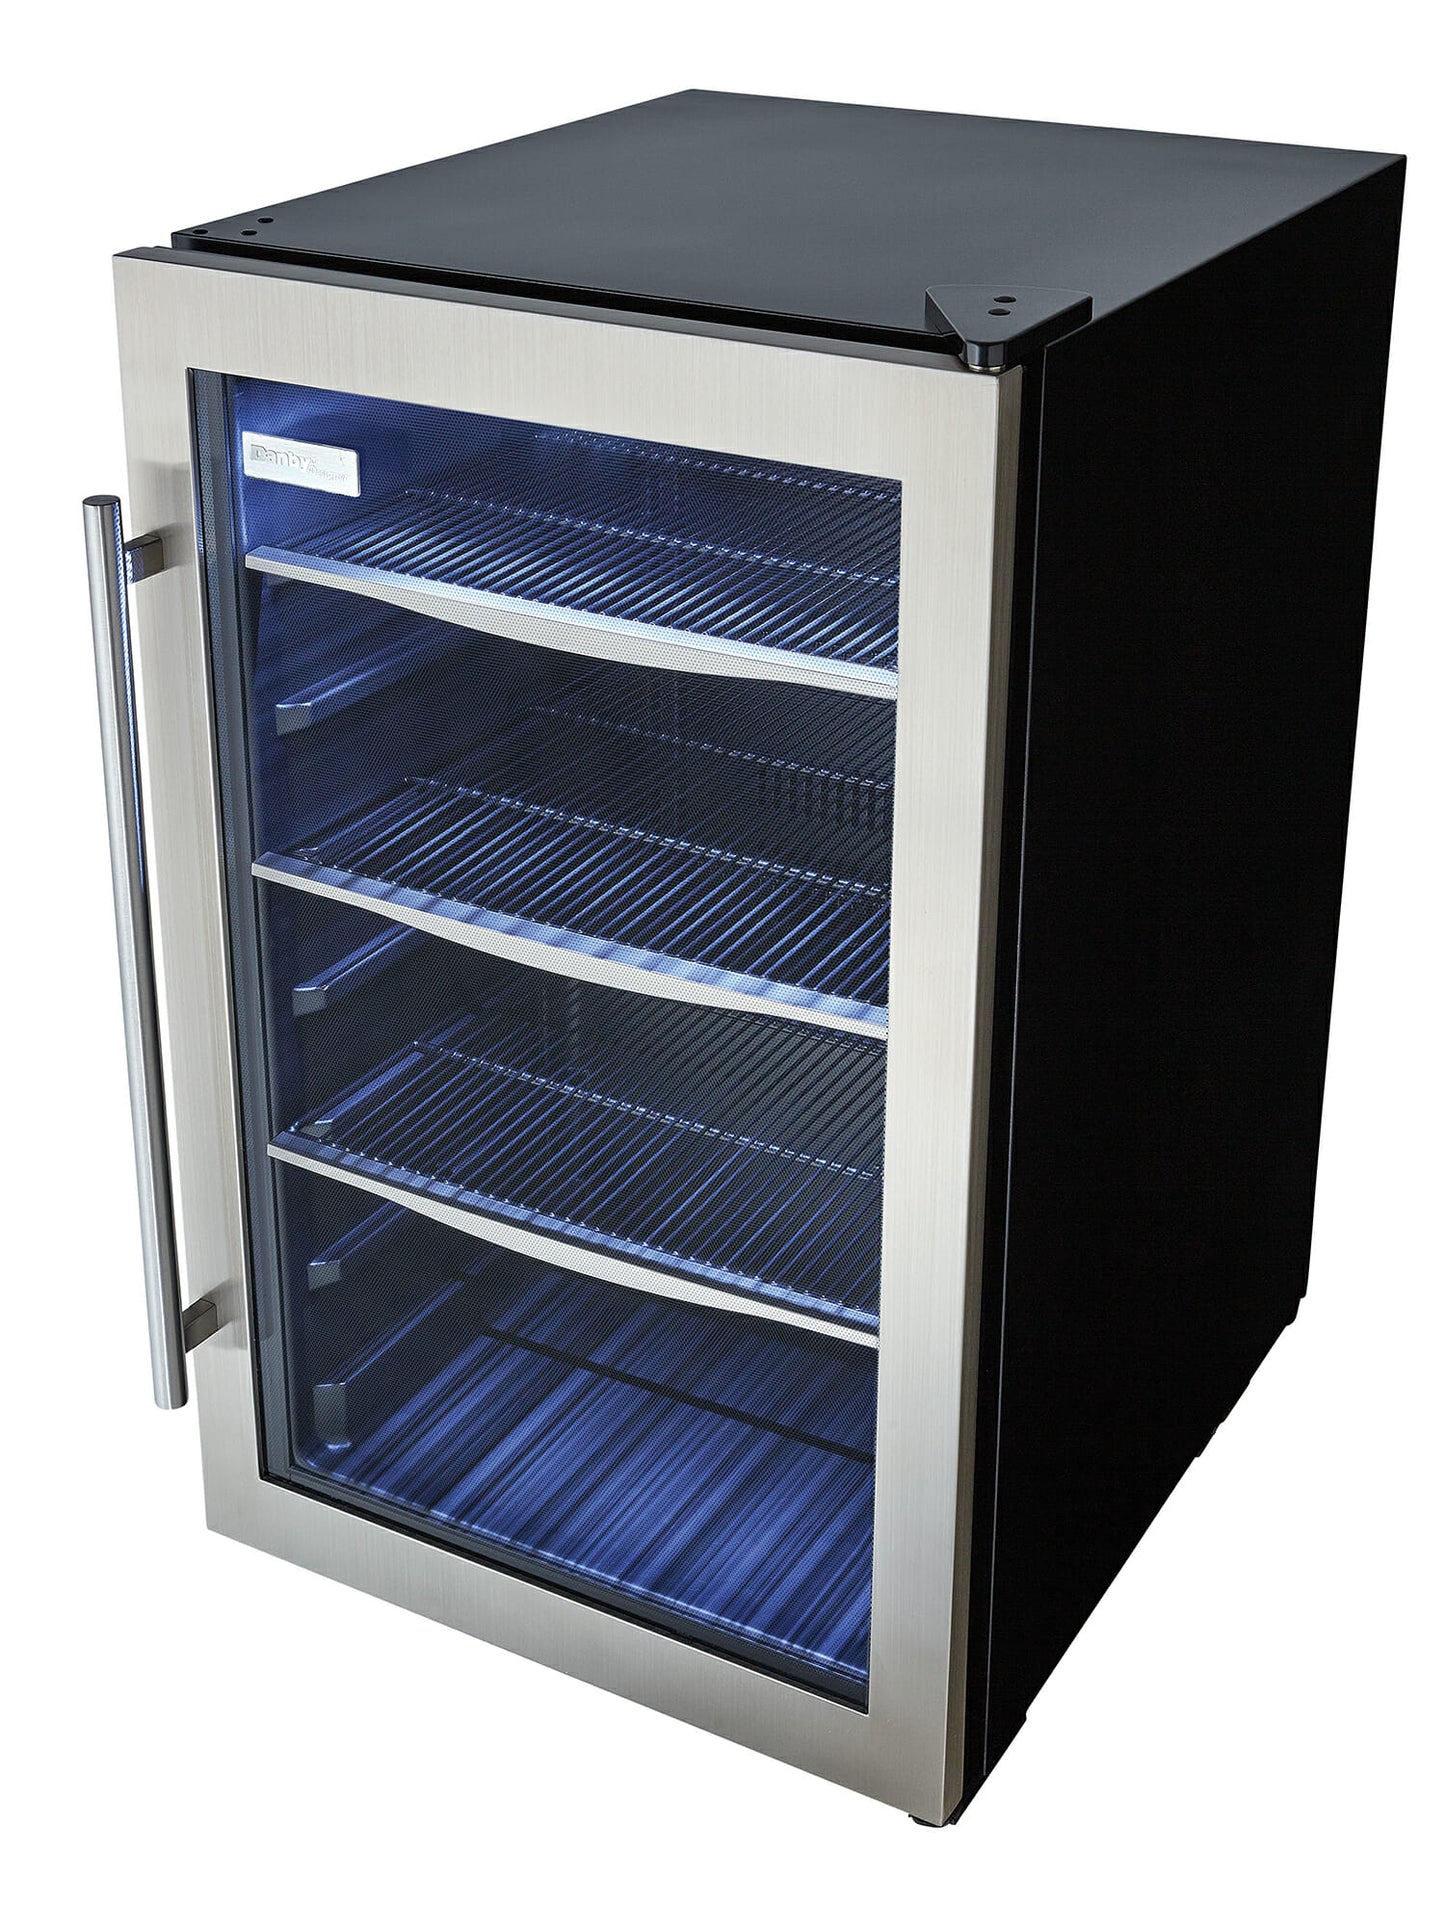 Danby 4.3 cu. ft. Free-Standing Beverage Center in Stainless Steel - DBC434A1BSSDD